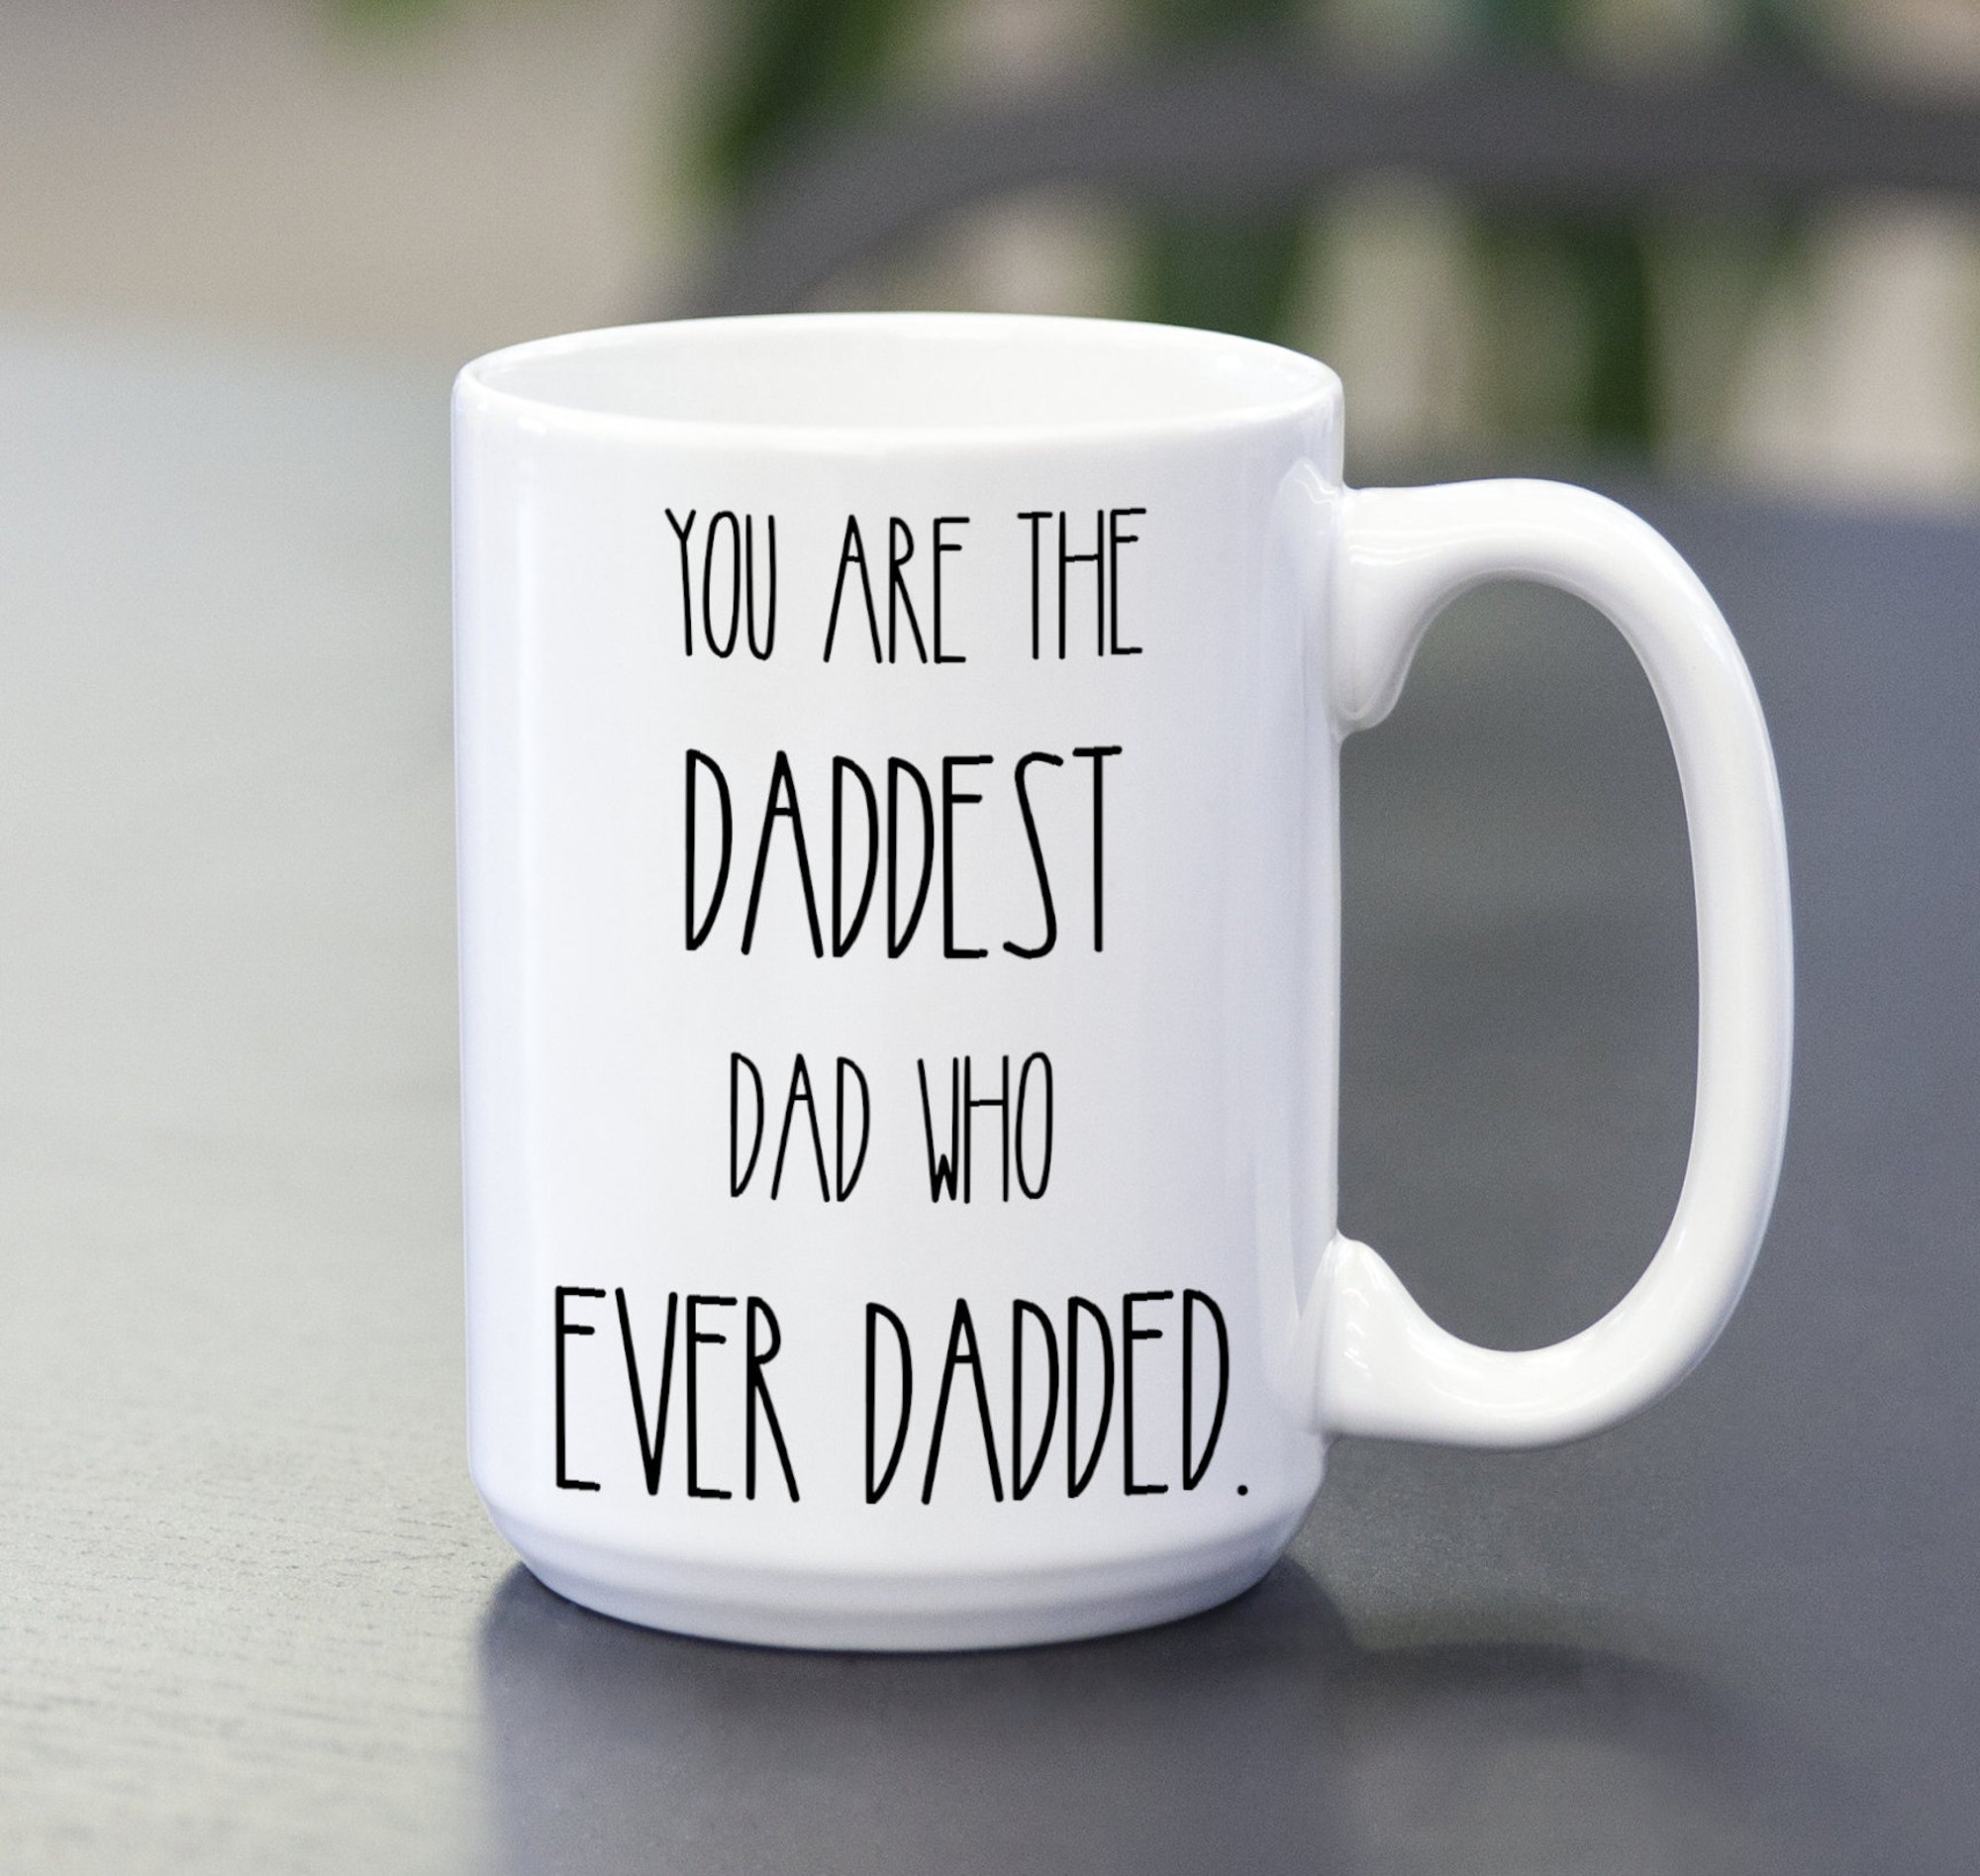 Discover You are the Daddest Dad Who Ever Dadded Mug